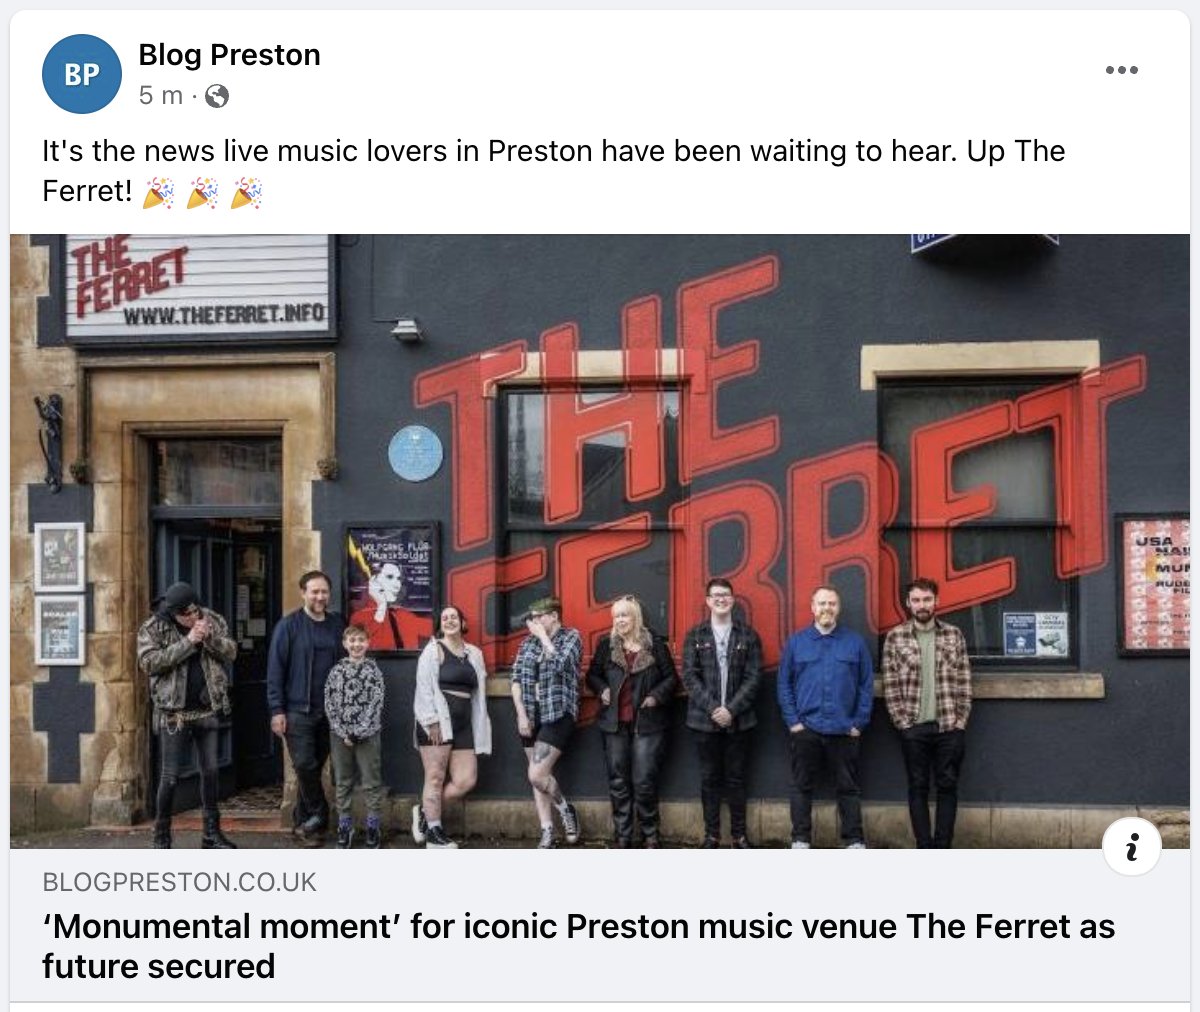 We did it! After months of work behind the scenes, today we can announce #WeSavedTheFerret! Thanks to our friends @musicvenueprop & @musicvenuetrust, @prestoncouncil, @ace_national & ALL OF YOU for donating / investing in / supporting The Ferret through the last couple of years.